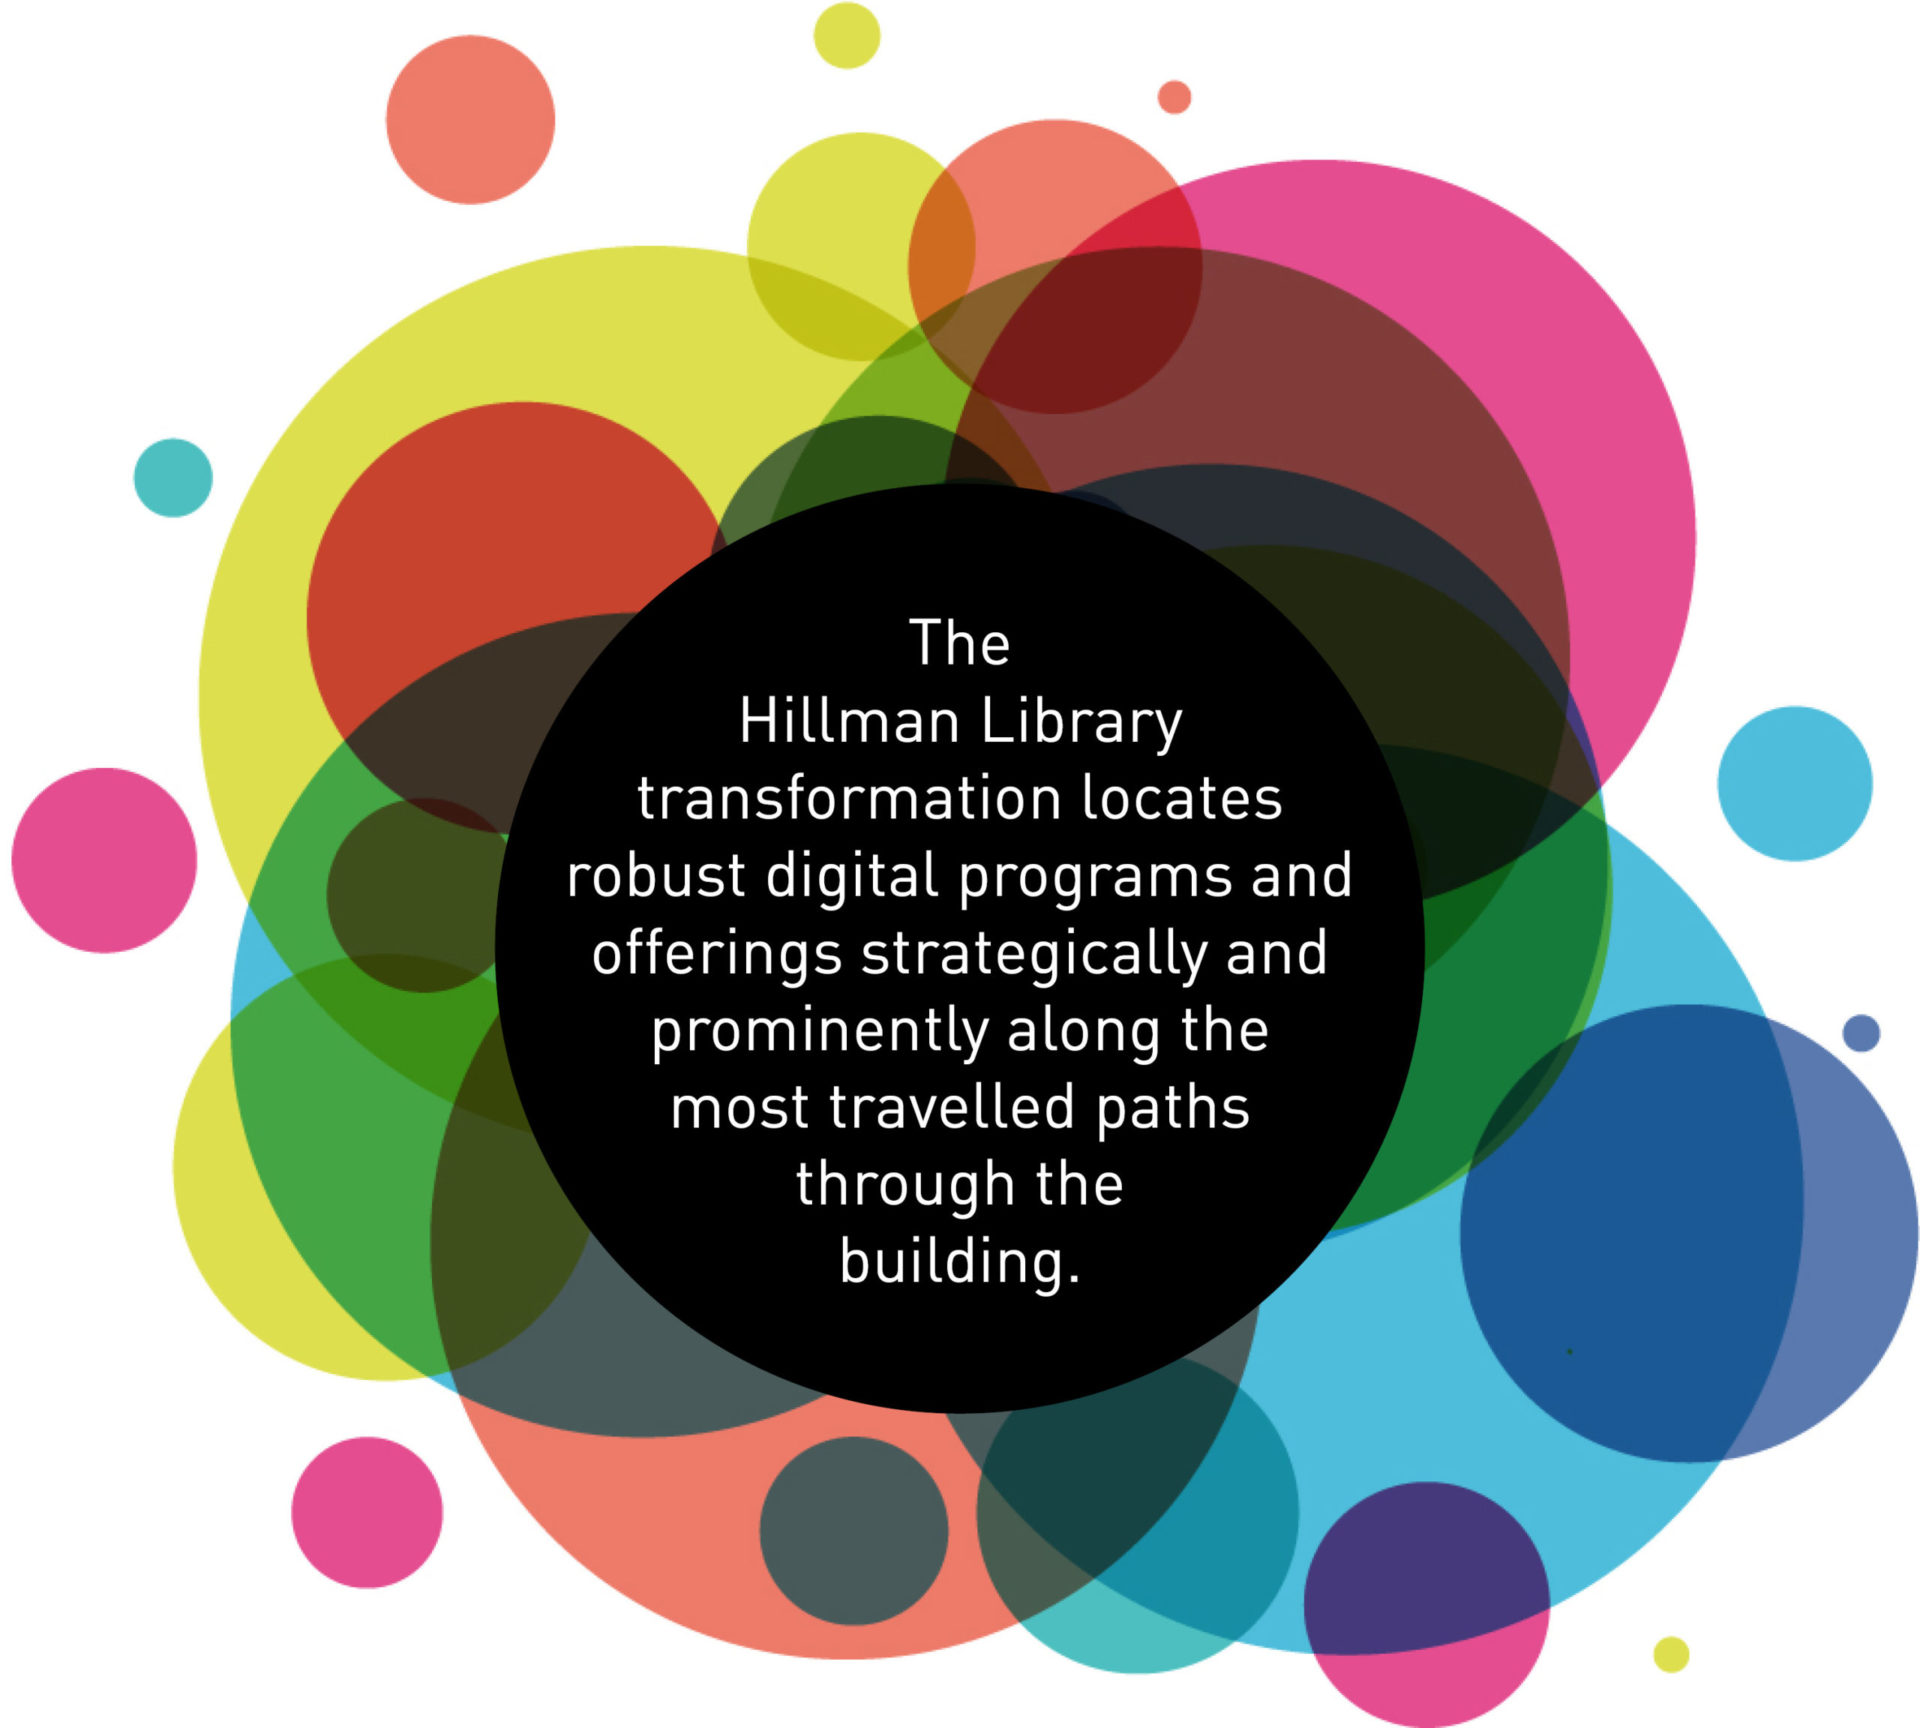 Pull Quote: The Hillman Library transformation locates robust digital programs and offerings strategically and prominently along the most travelled paths through the building.